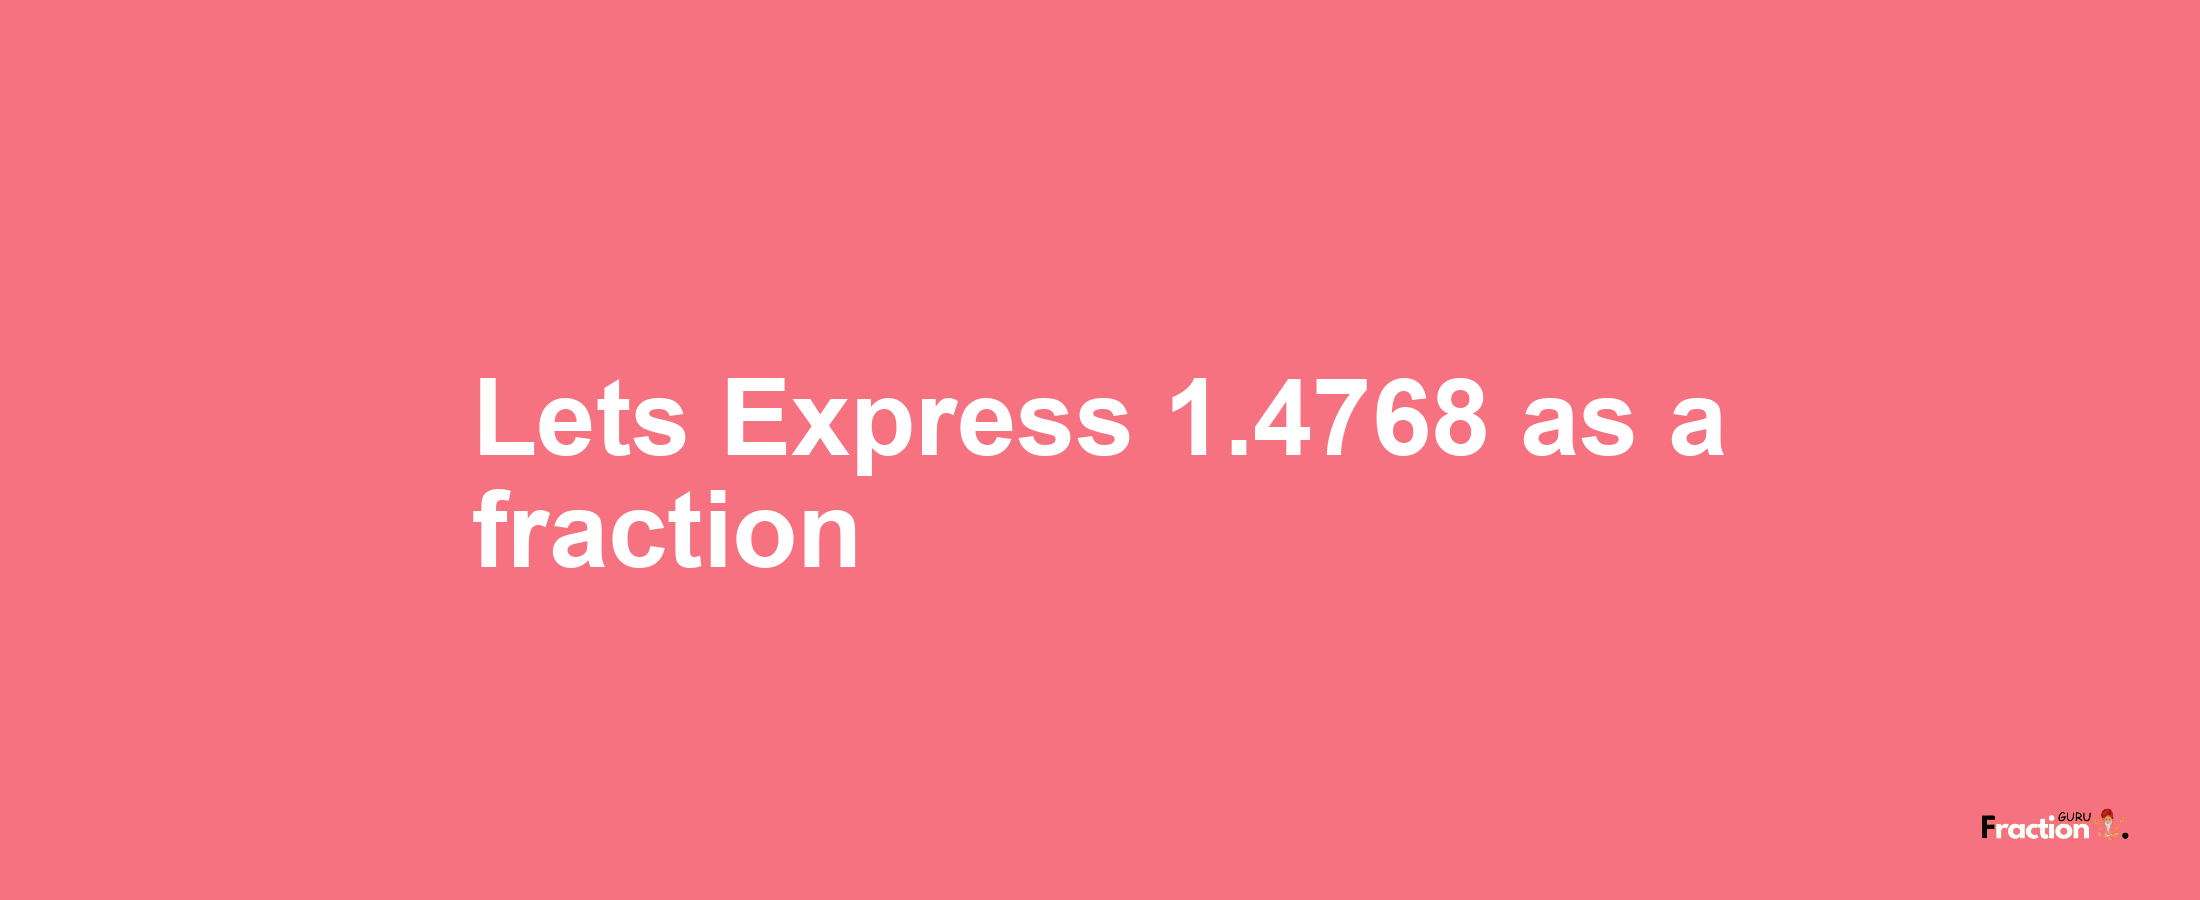 Lets Express 1.4768 as afraction